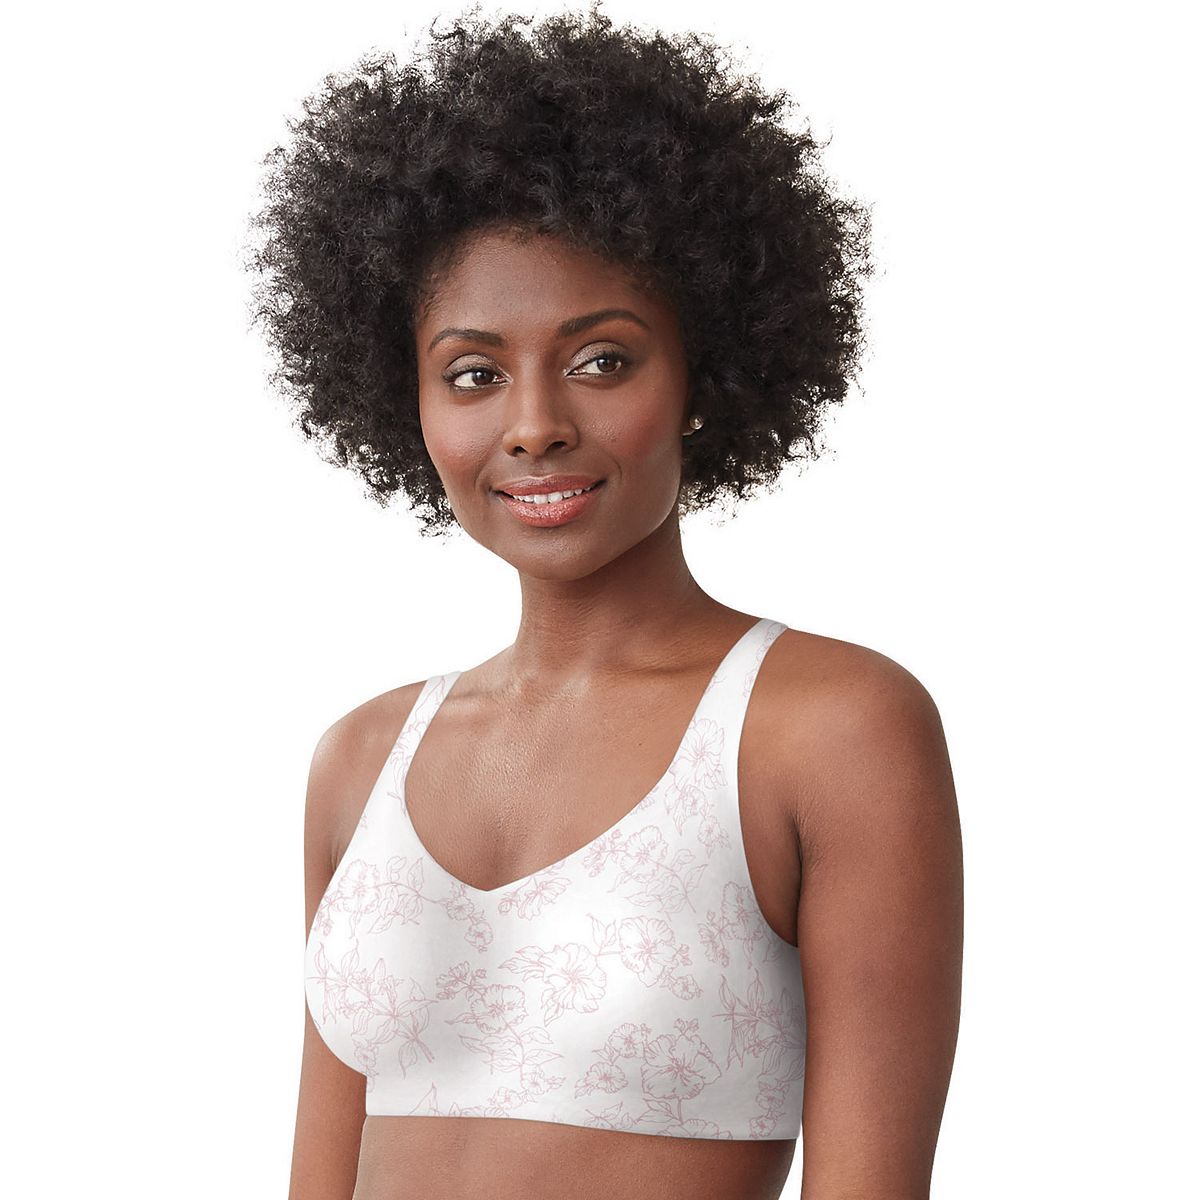 Bali Bras: Are You a JMS, Playtex or Bali Girl?